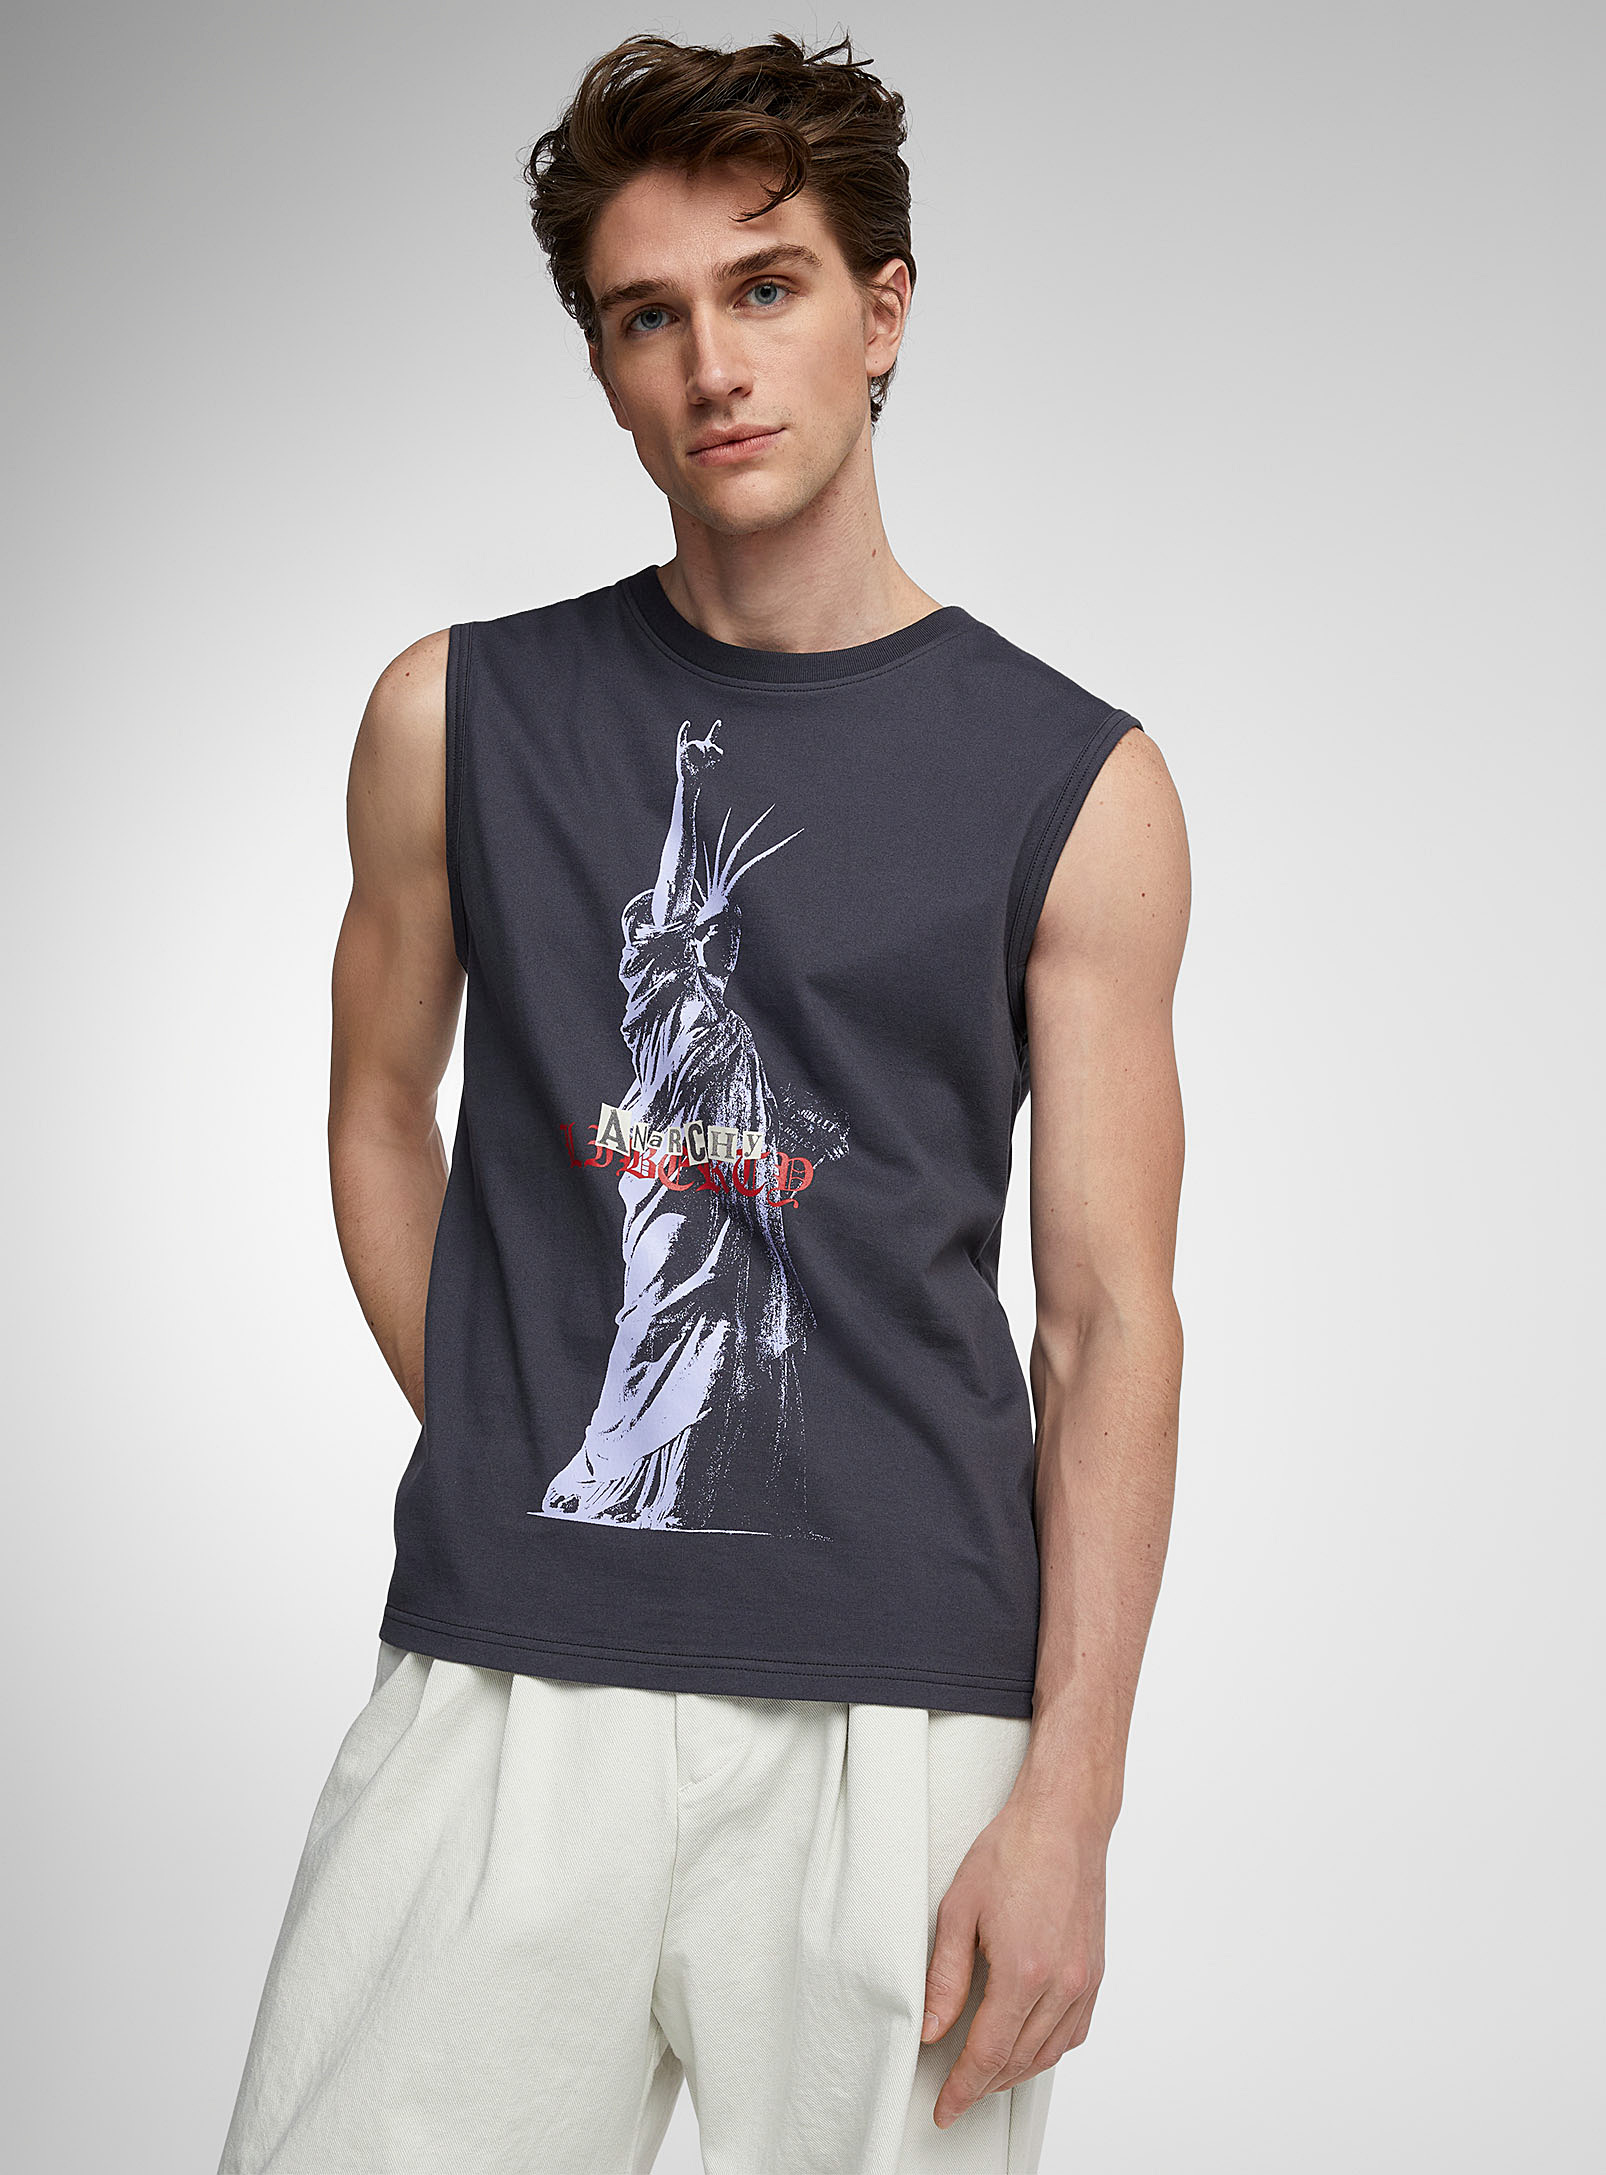 Tee Library Statue Of Liberty Sleeveless T-shirt In Charcoal